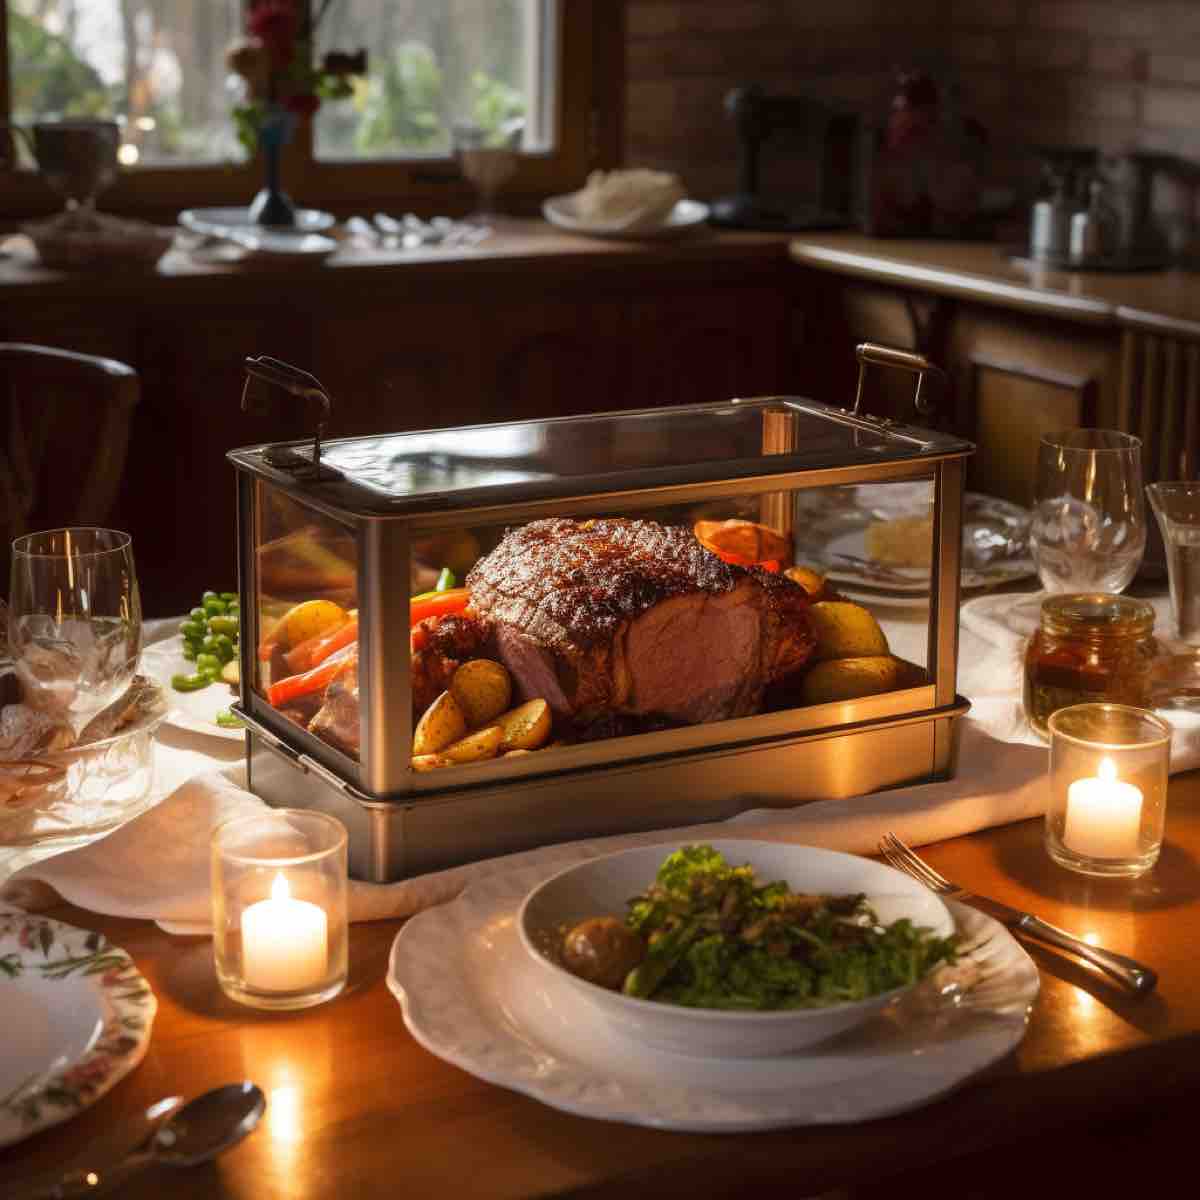 Choosing the Ideal Food Warmer for Your Holiday Feast